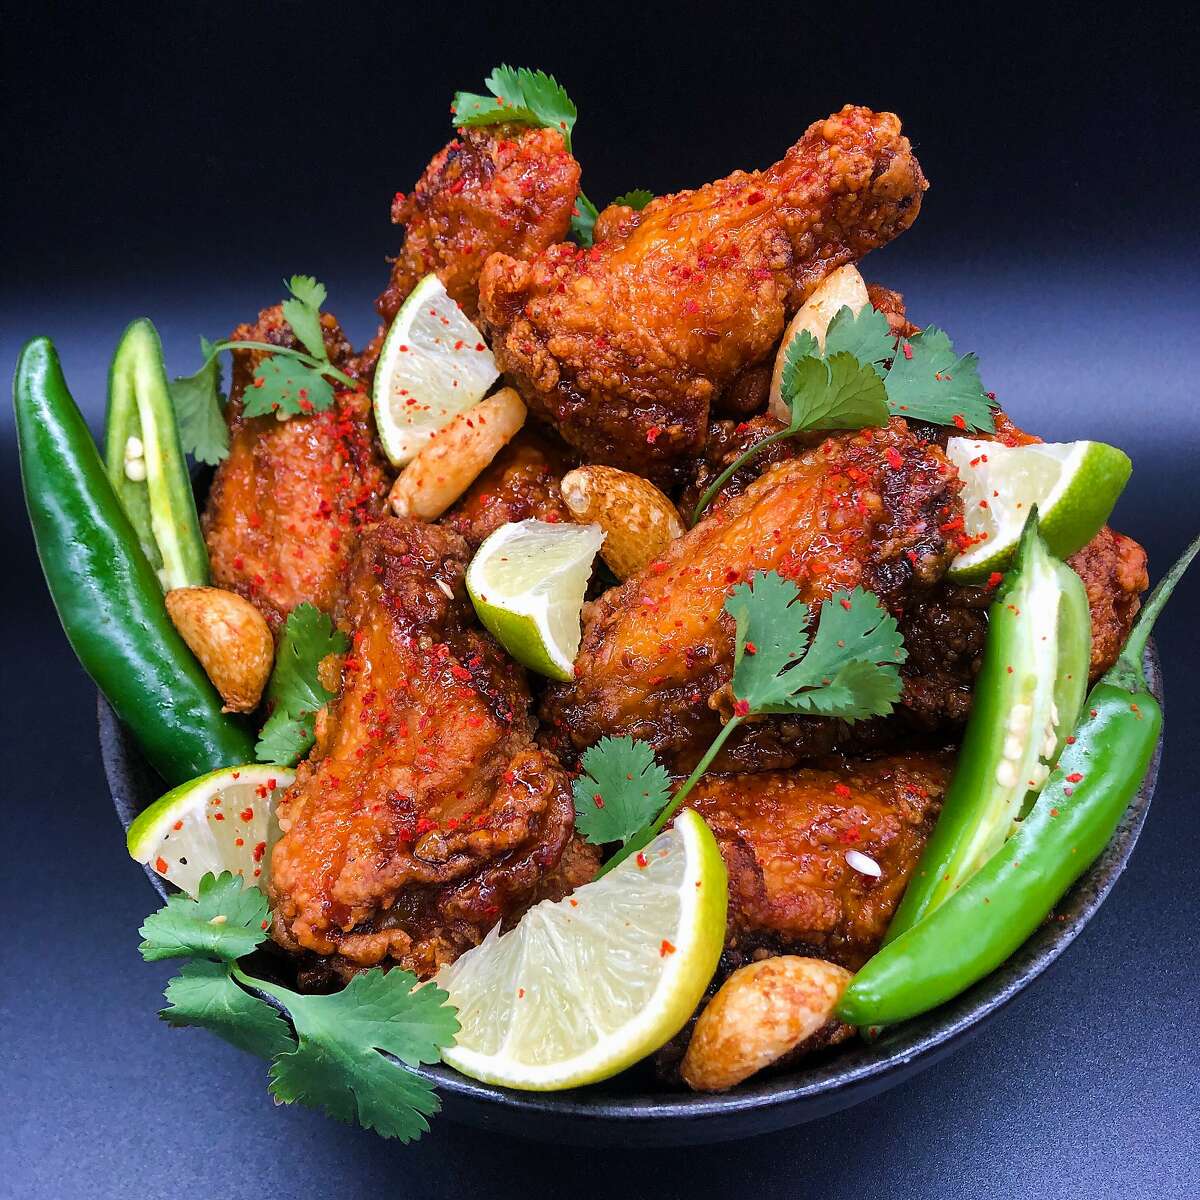 Thai chicken wings from Bap, a new virtual kitchen from Edwin Bayone III, executive chef of the modern Korean restaurant Um.ma in San Francisco.